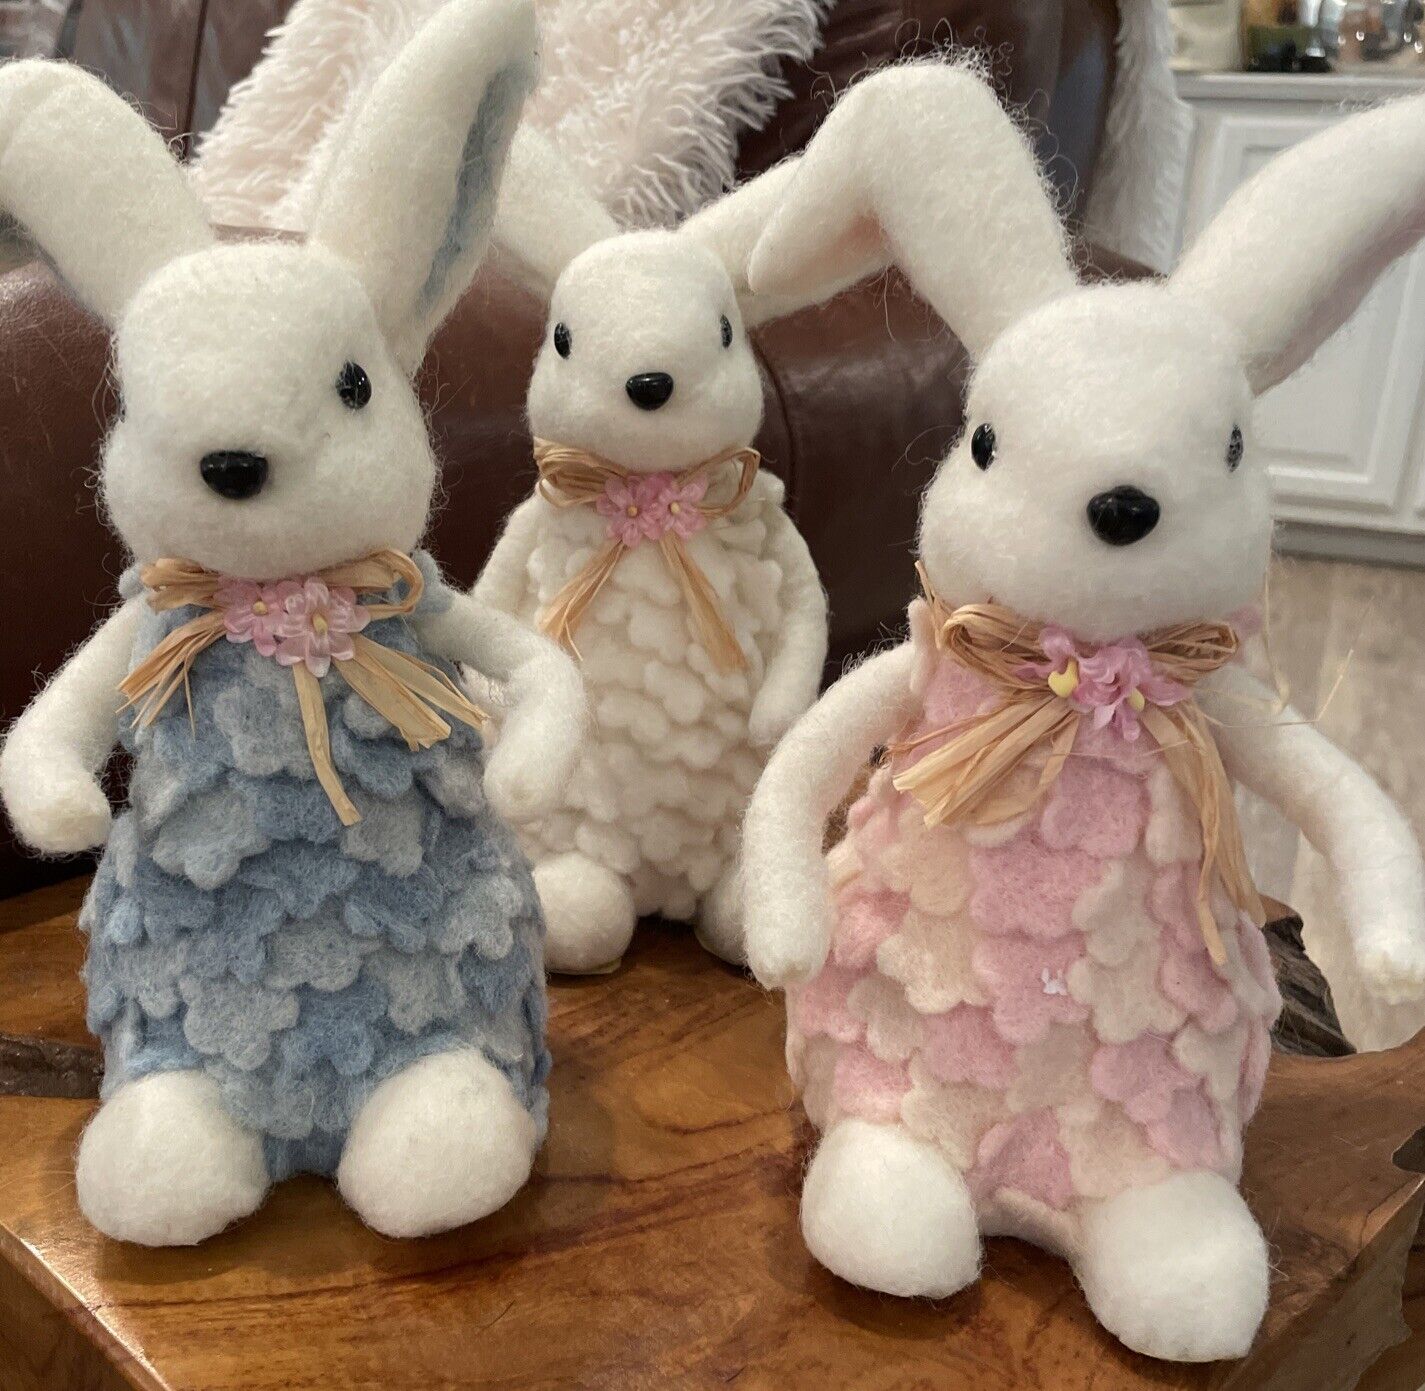 3-Adorable Vintage Felt Styrofoam Bunnies With Wired Arms To Shape  9”